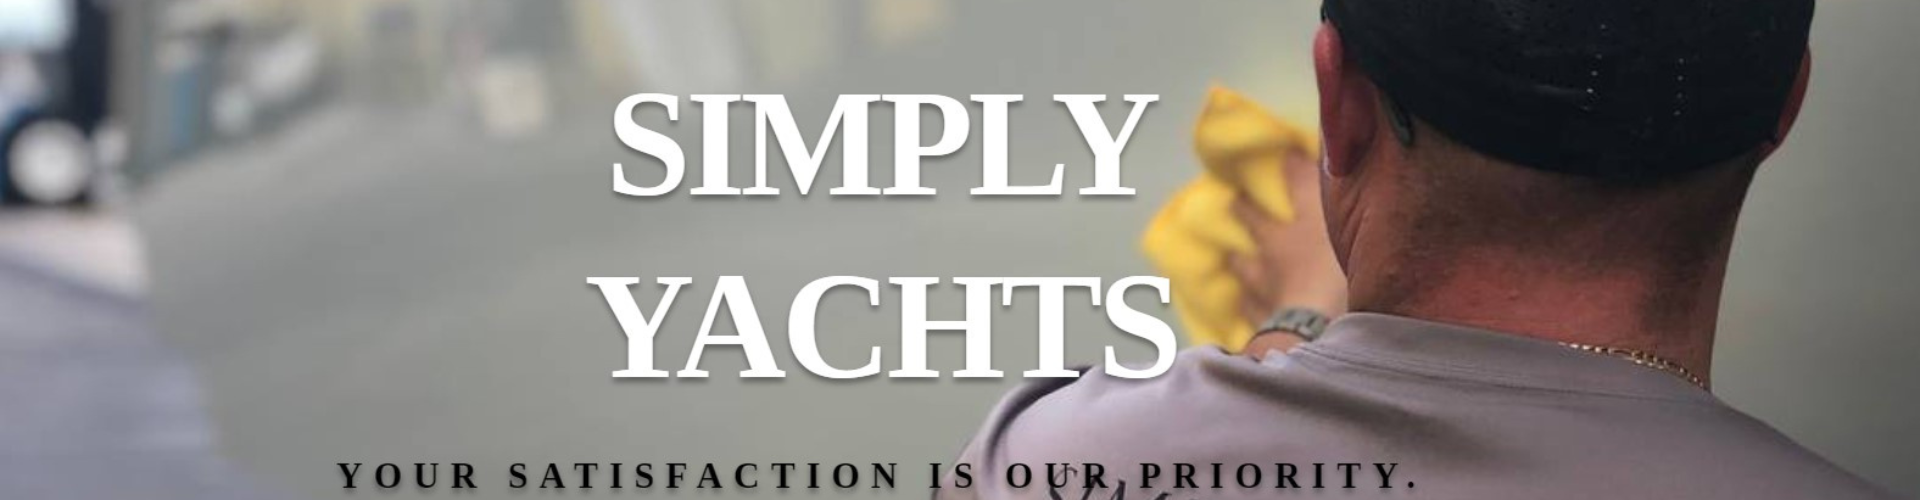 simply yachts Cover Image